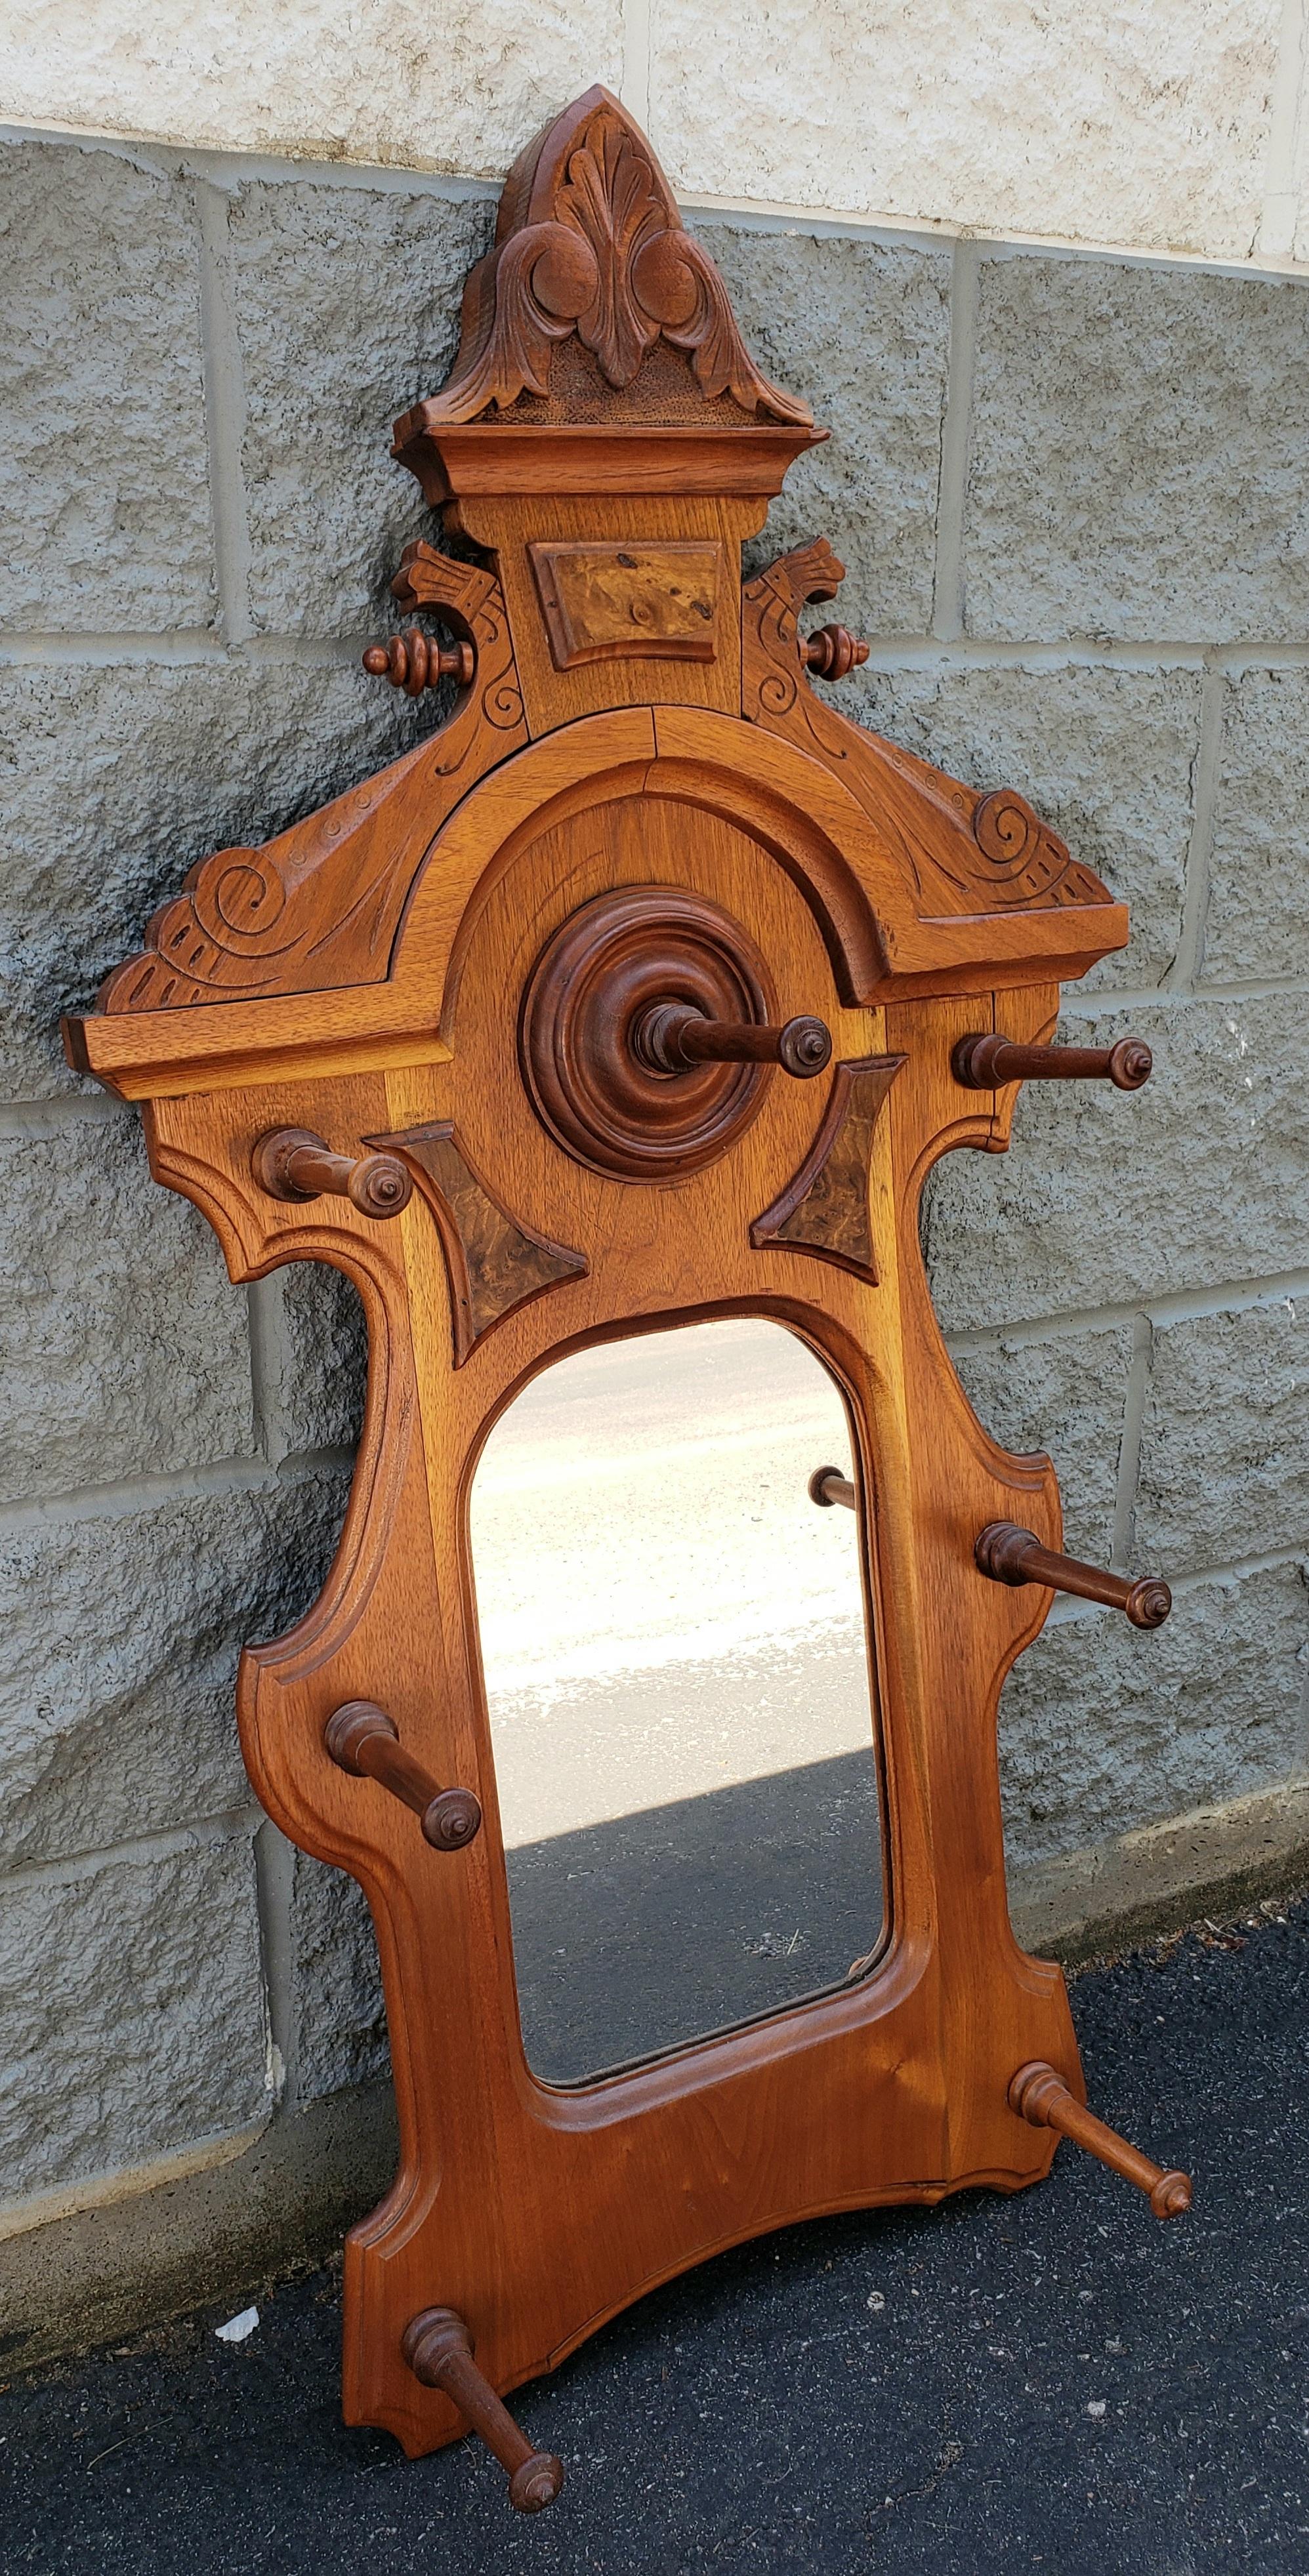 A 19th Century Eastlake Golden Oak handcrafted Rococo Style Coat and Hat Hanging Hall Mirror in good condition. Comes with 6 pegs for you hats or coats. Each peg is 5.75